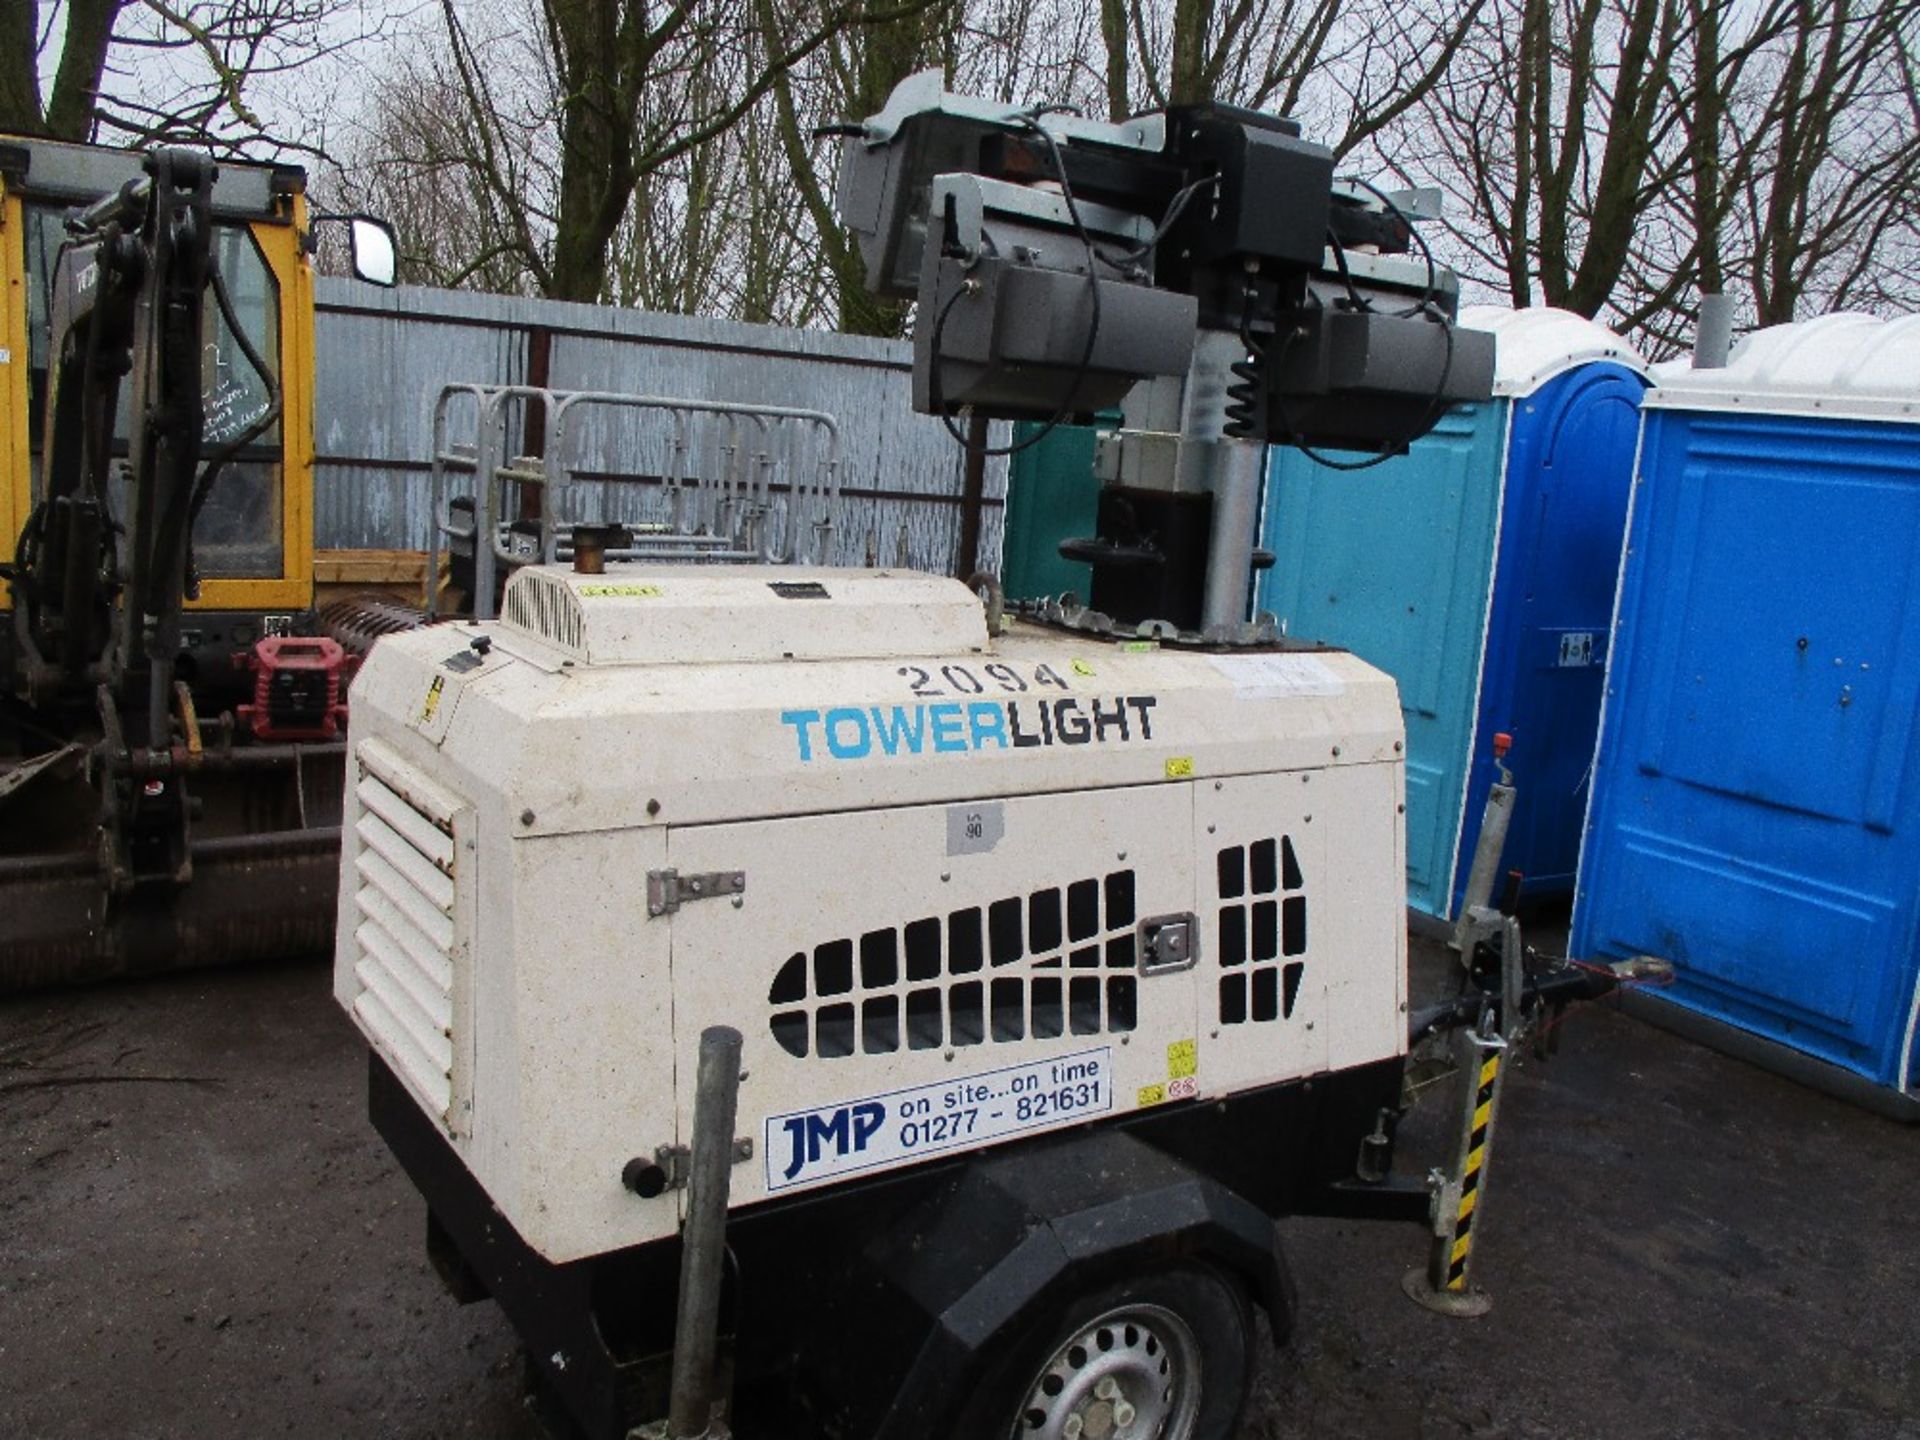 VT1 TOWER LIGHT LIGHTING TOWER YEAR 2012 PLANT ID NUMBER: 2094 WHEN TESTED: RUNS AND LIGHTS  AND